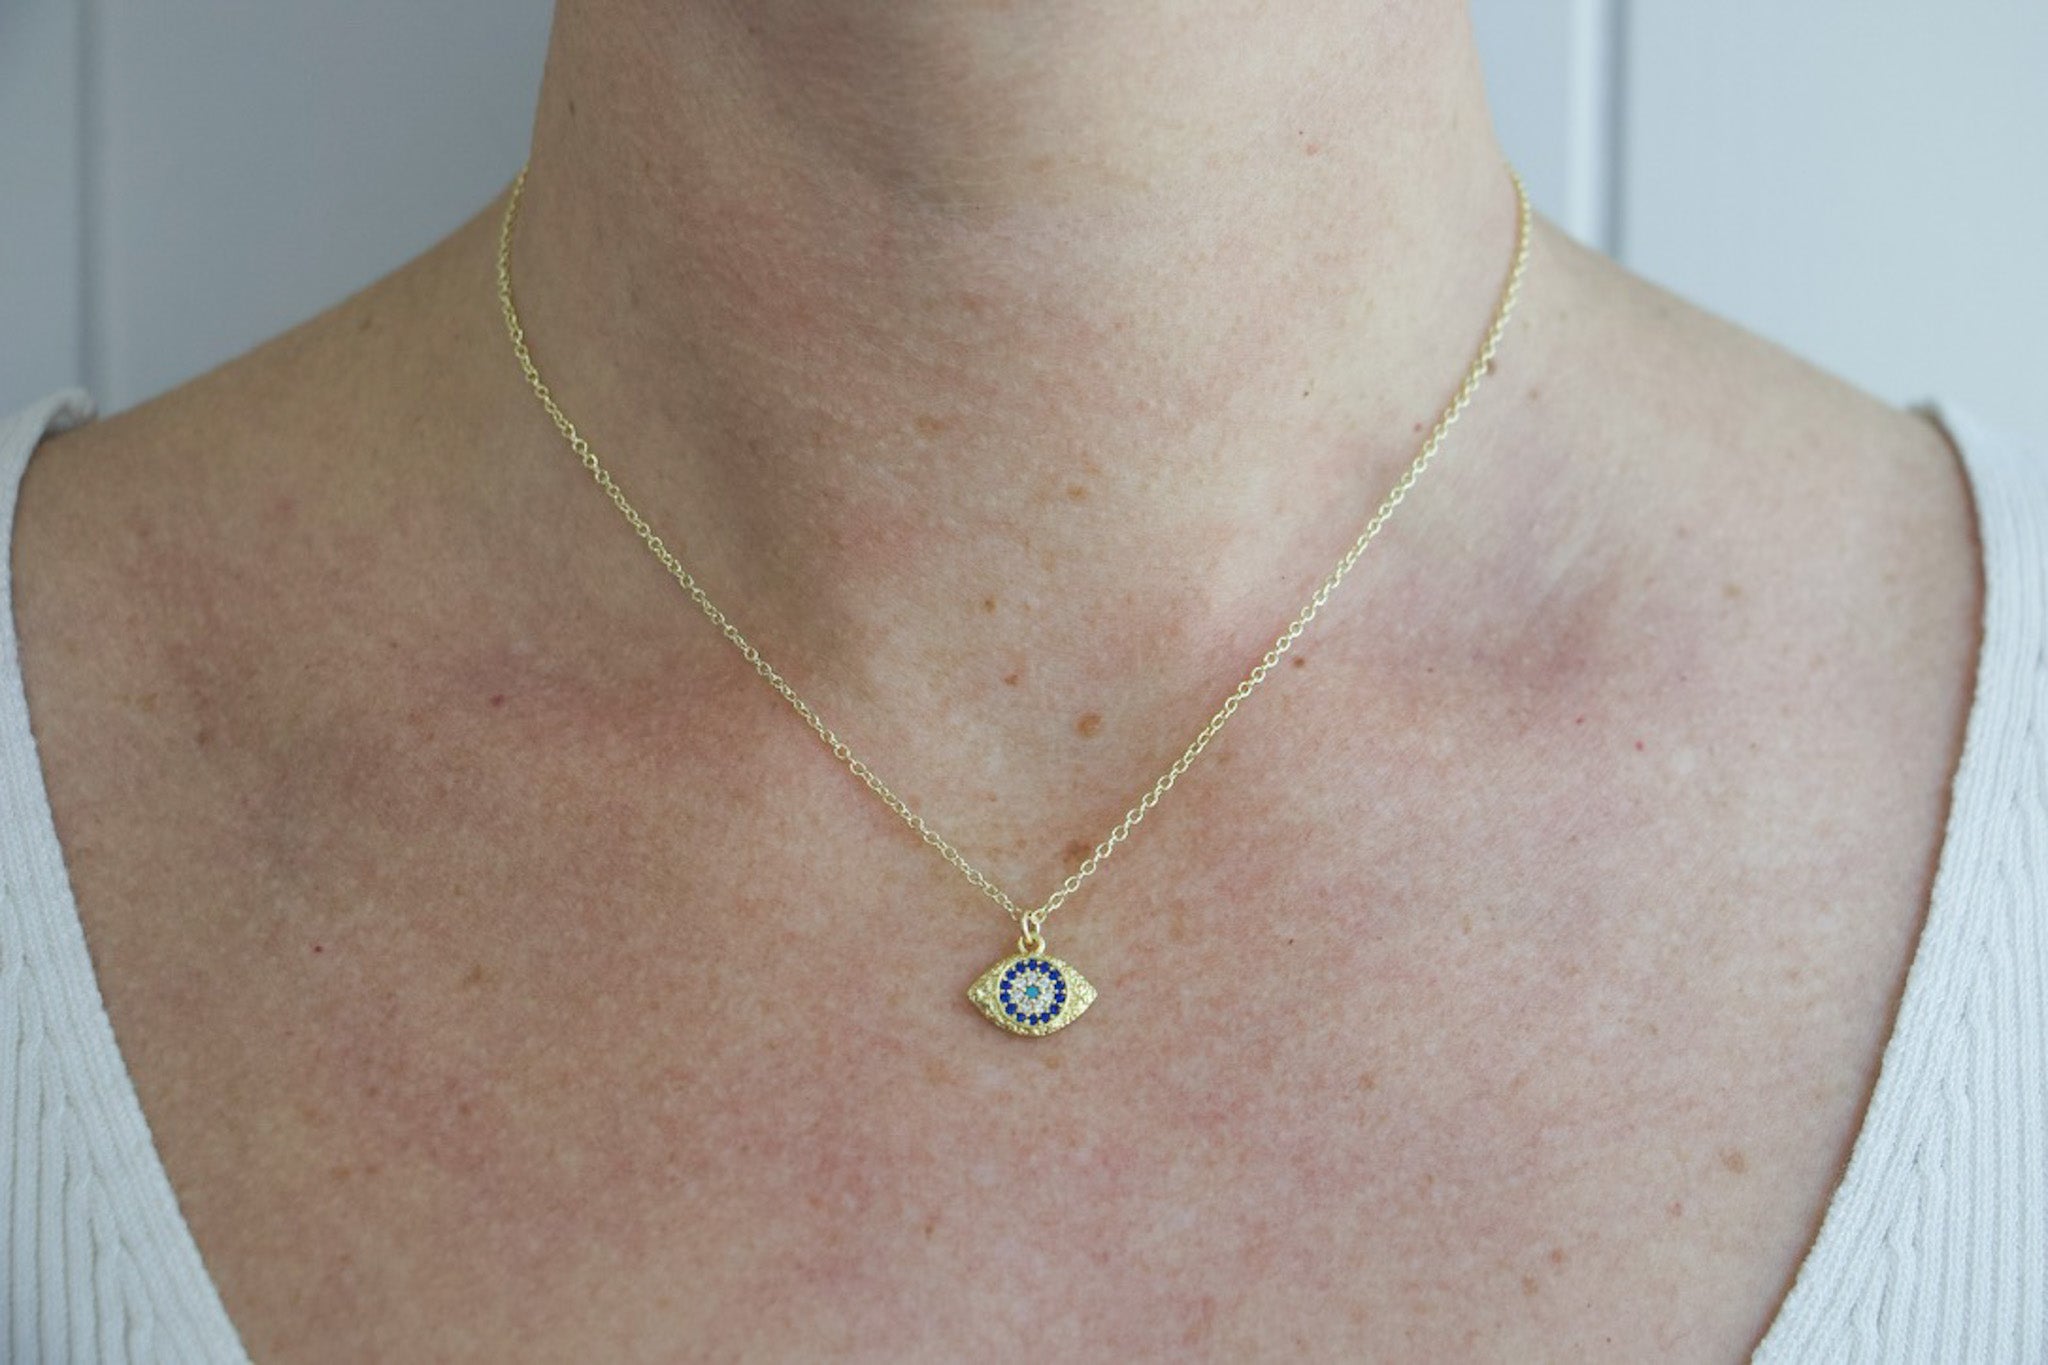 Model wearing AW Boutique gold filled jewellery. Evil Eye pendant charm on a dainty 16 inch fine cable necklace chain. Part of the Protection collection.